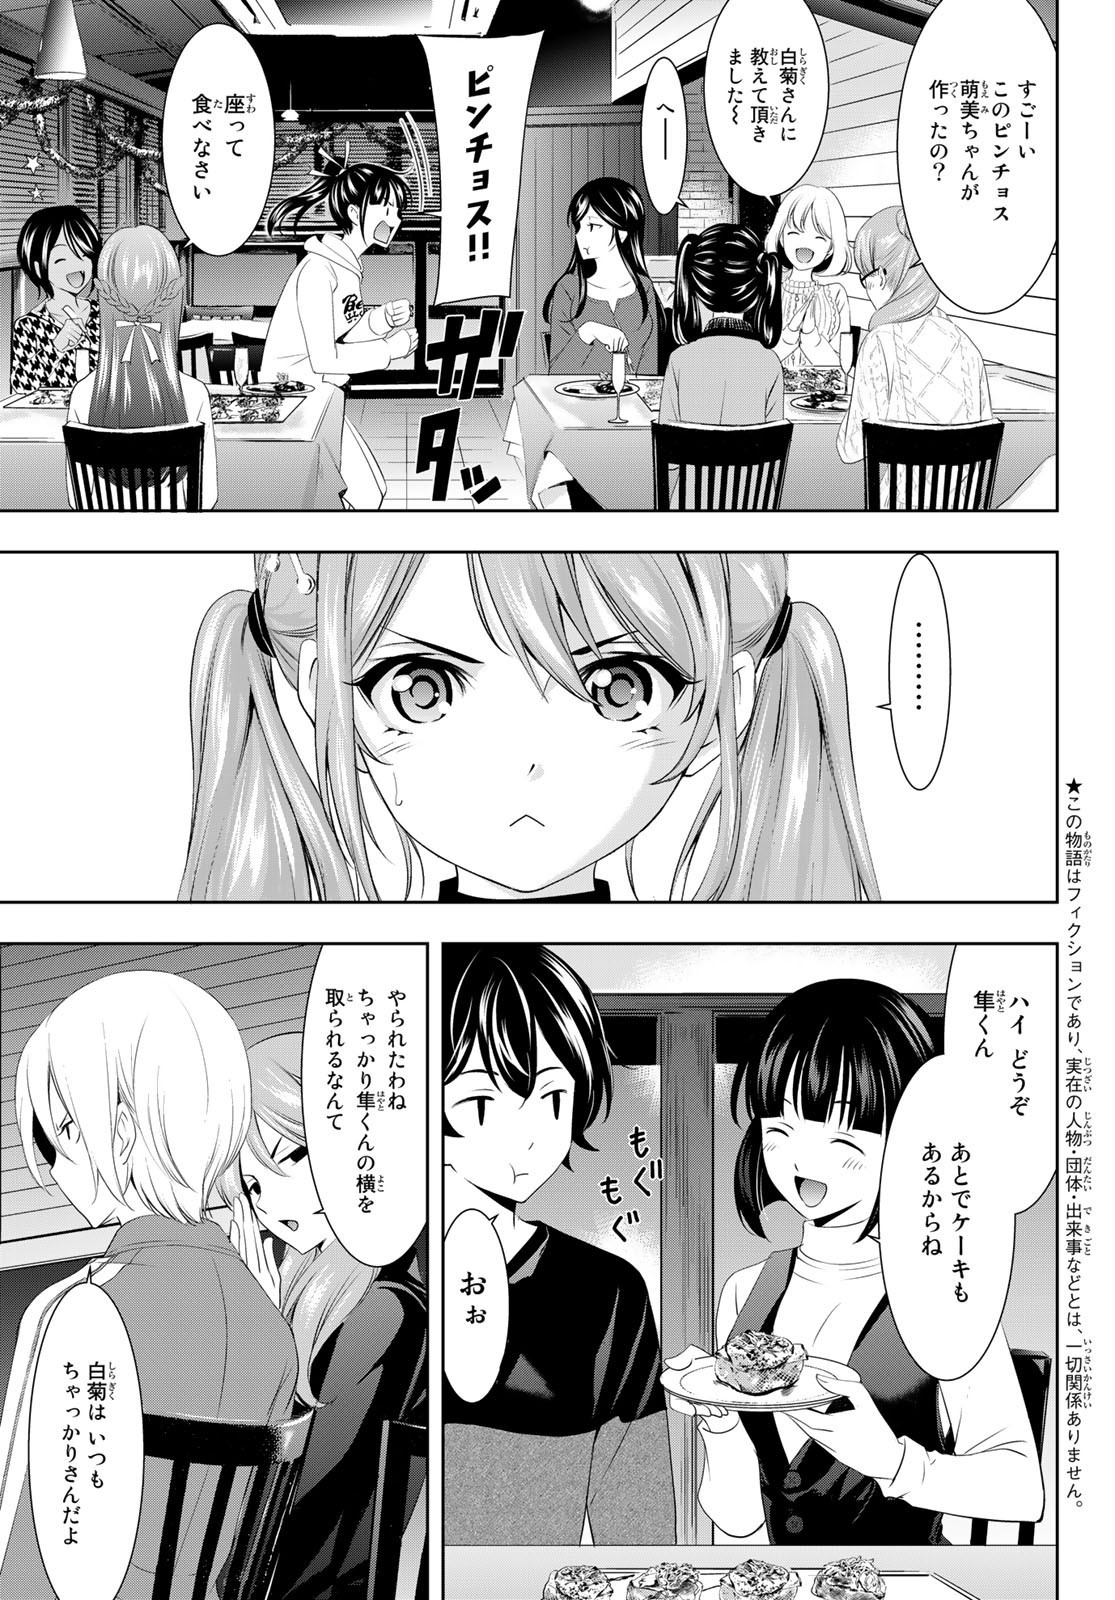 Goddess-Cafe-Terrace - Chapter 077 - Page 3